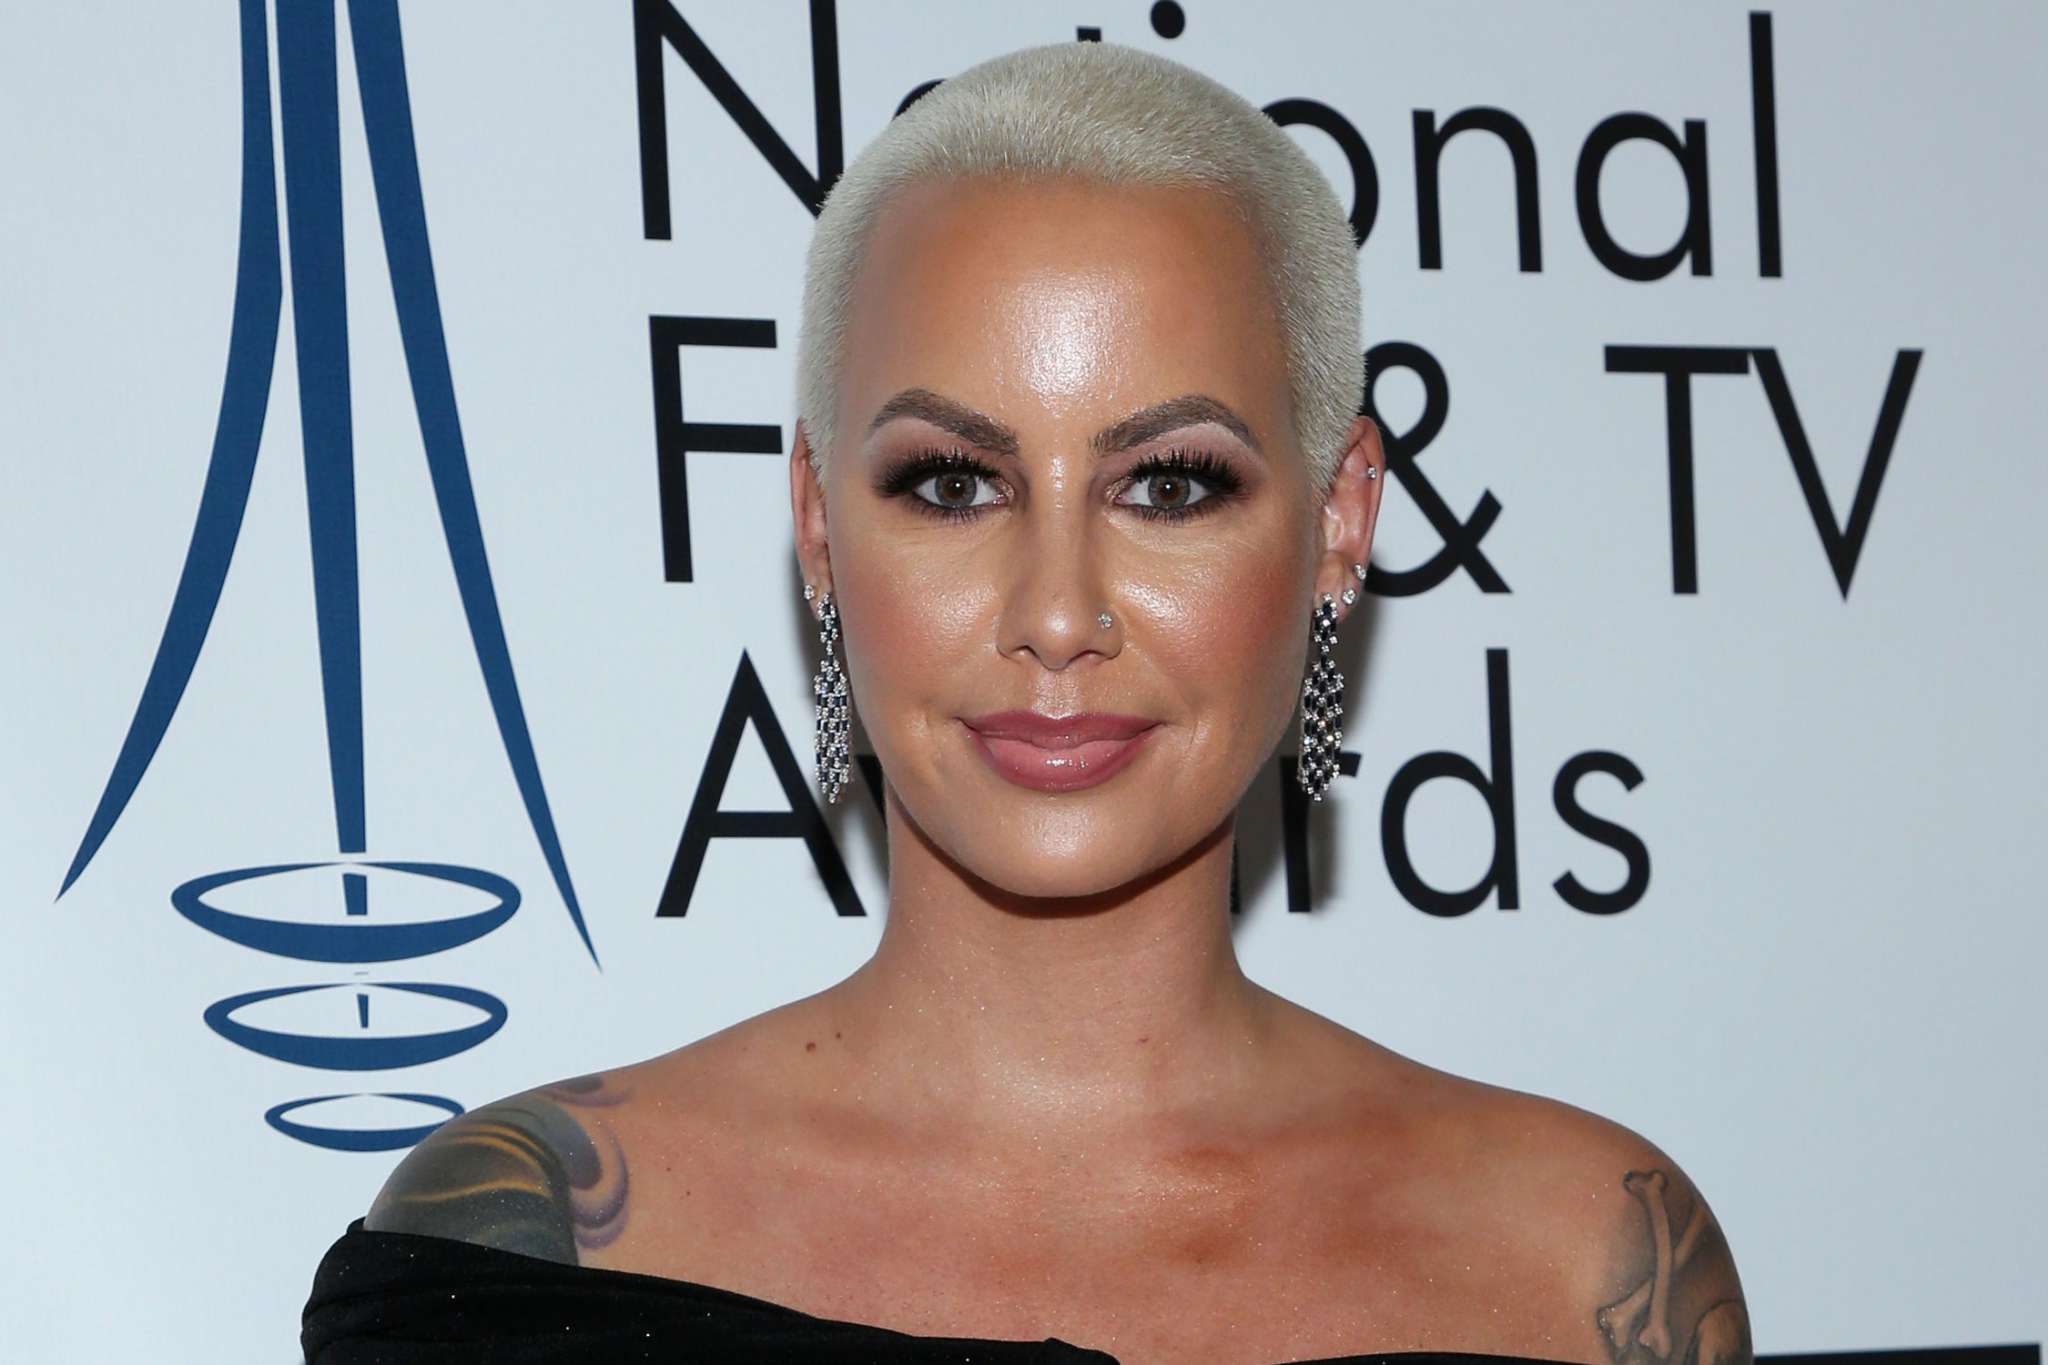 ”amber-rose-drops-a-message-for-t-i-says-she-stands-with-the-lgbtq-community”